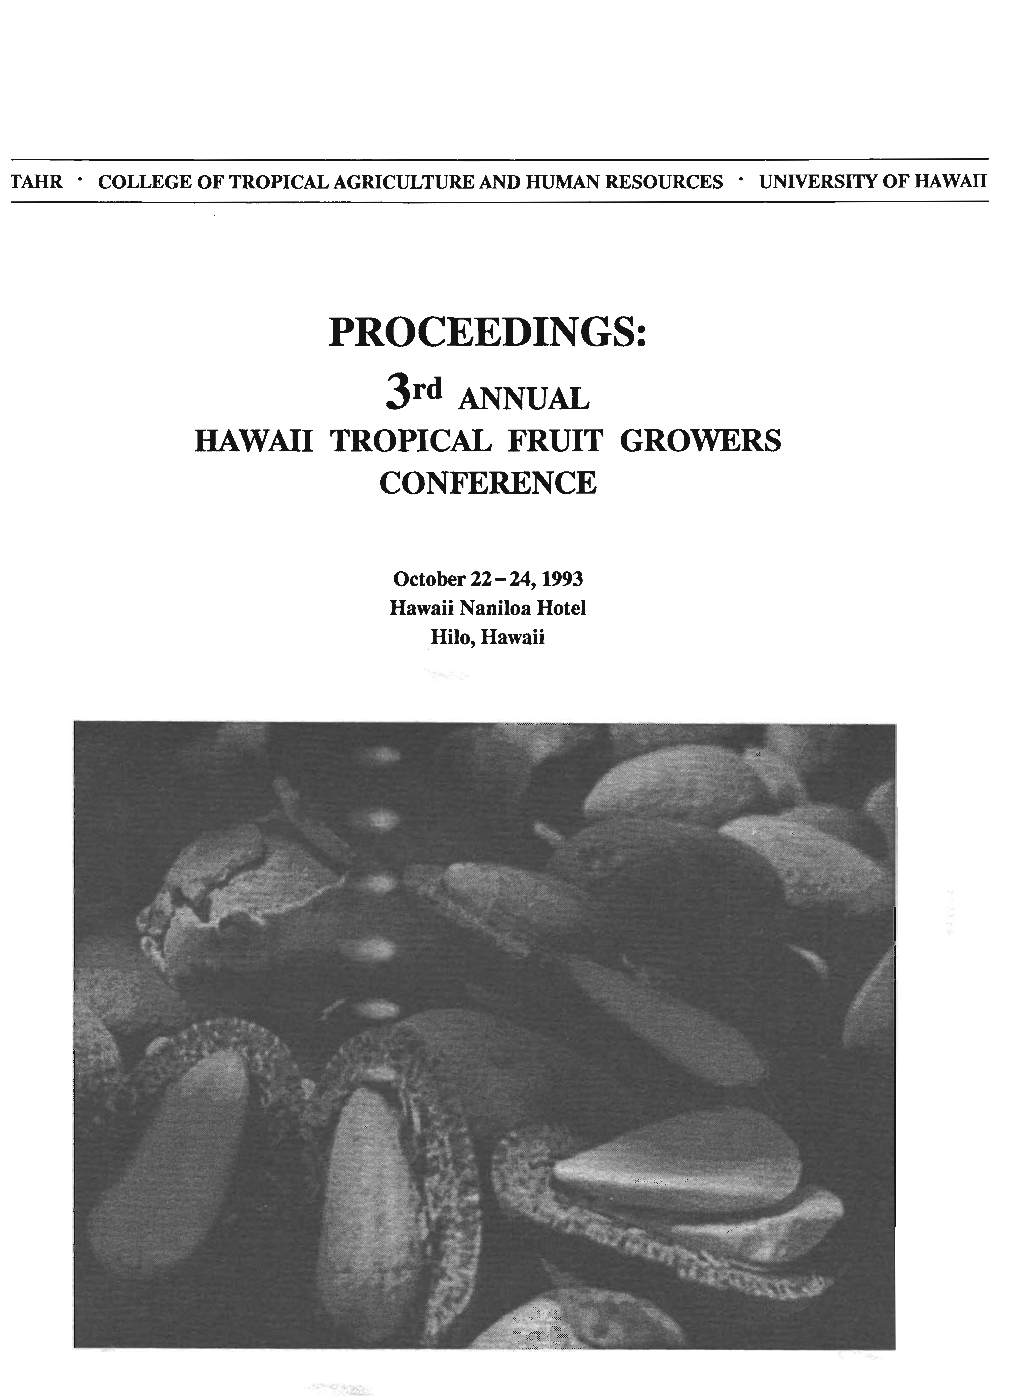 Proceedings: Hawaii Tropical Fruit Growers Third Annual Conference